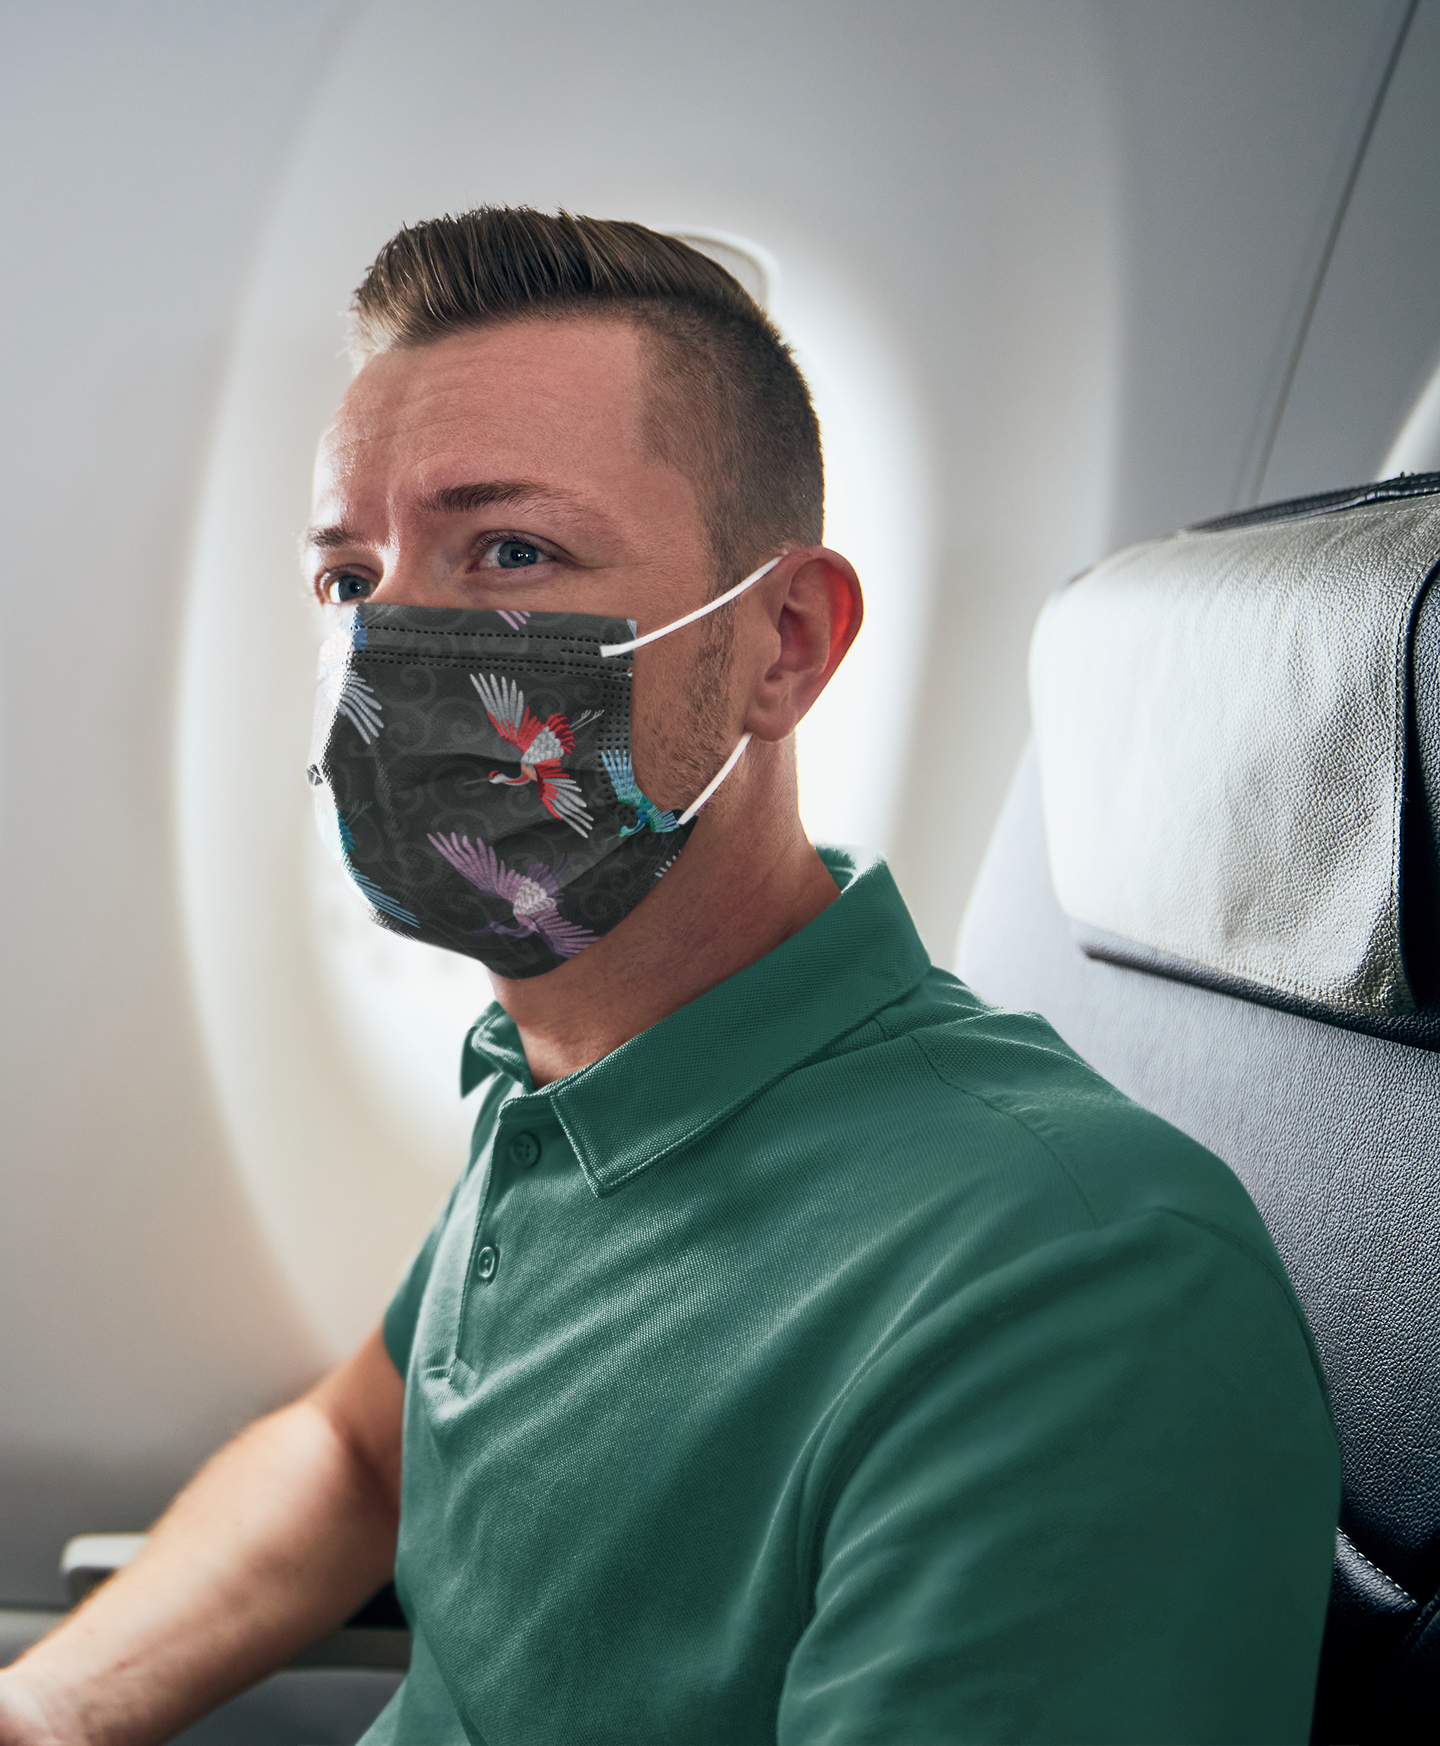 face-mask-mockup-of-a-man-on-a-plane-41961-r-el2 (2).png